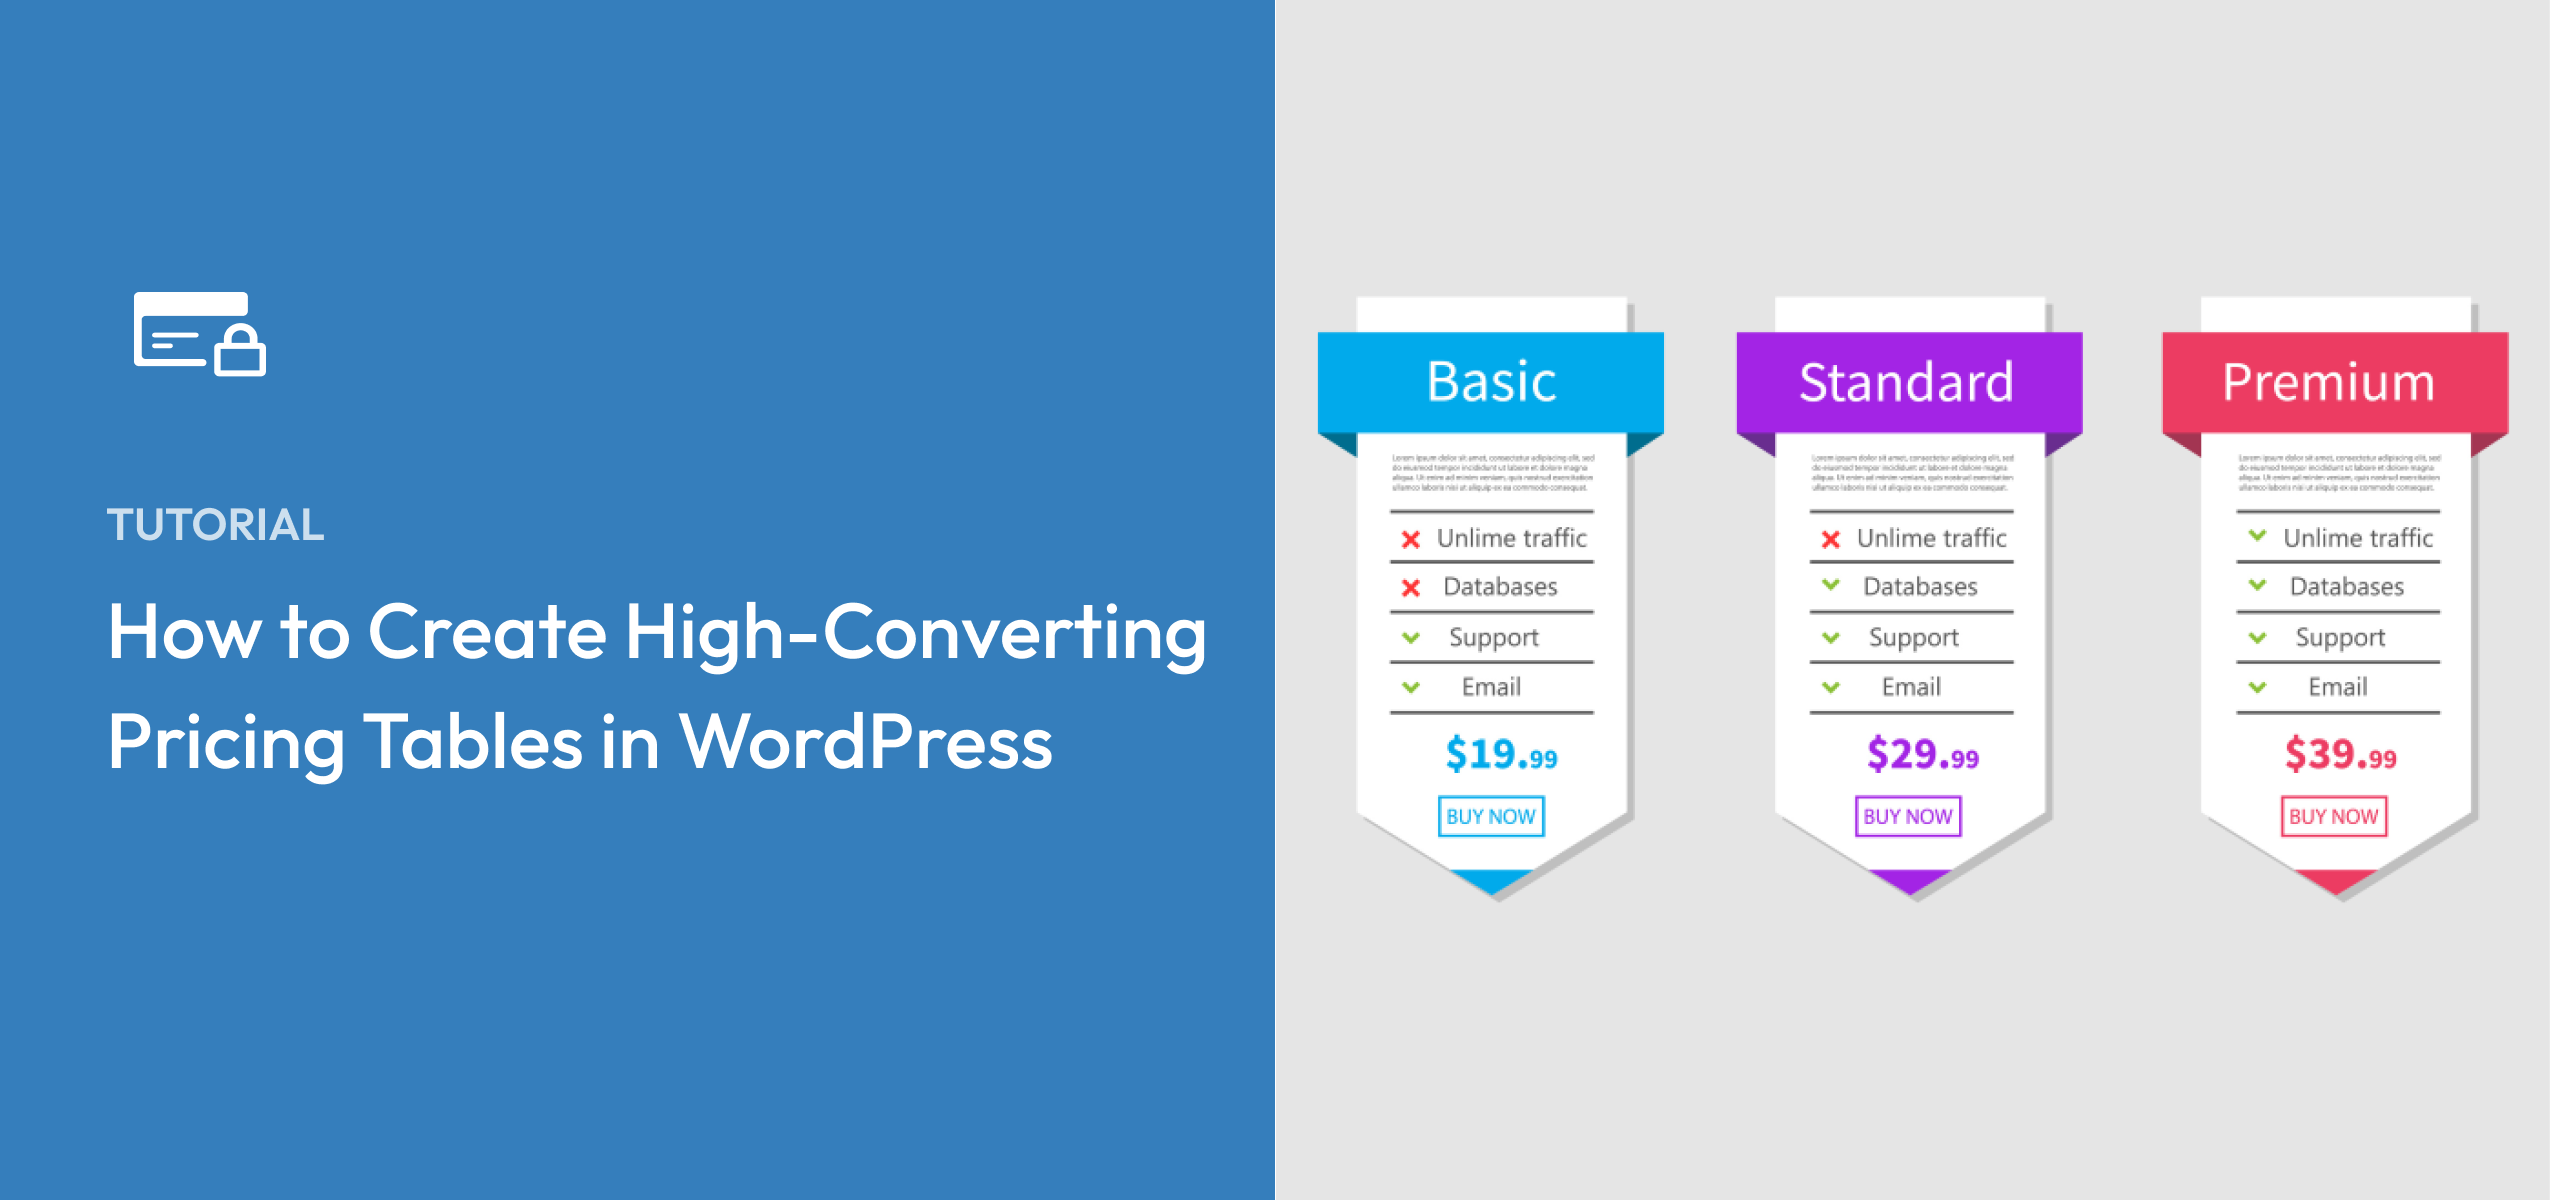 How to Create High-Converting Pricing Tables in WordPress